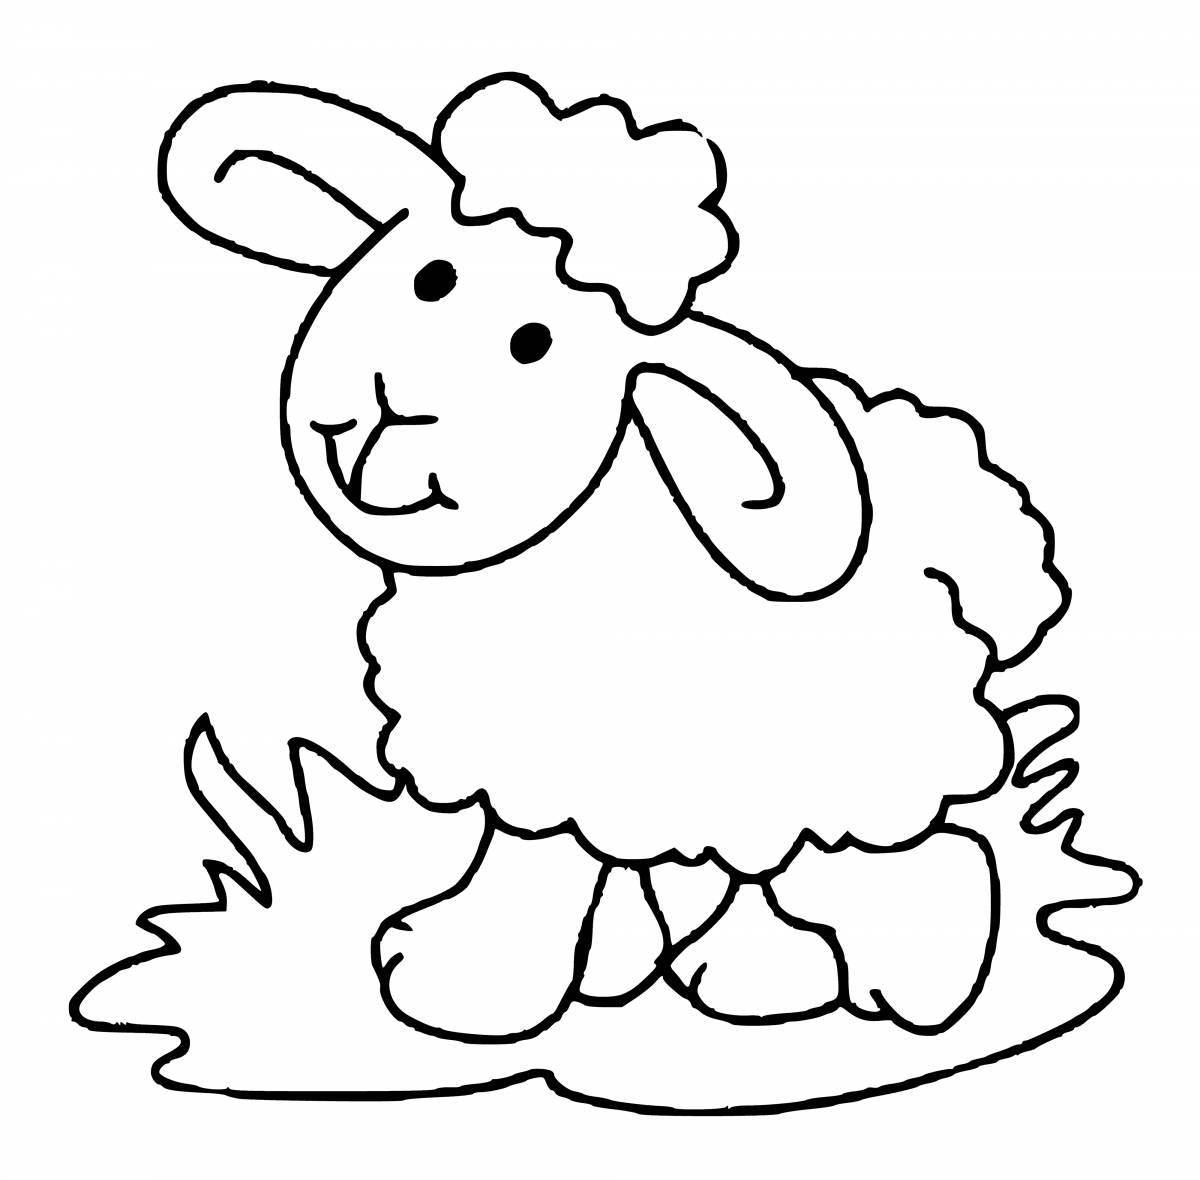 Whimsical lamb coloring book for 2-3 year olds